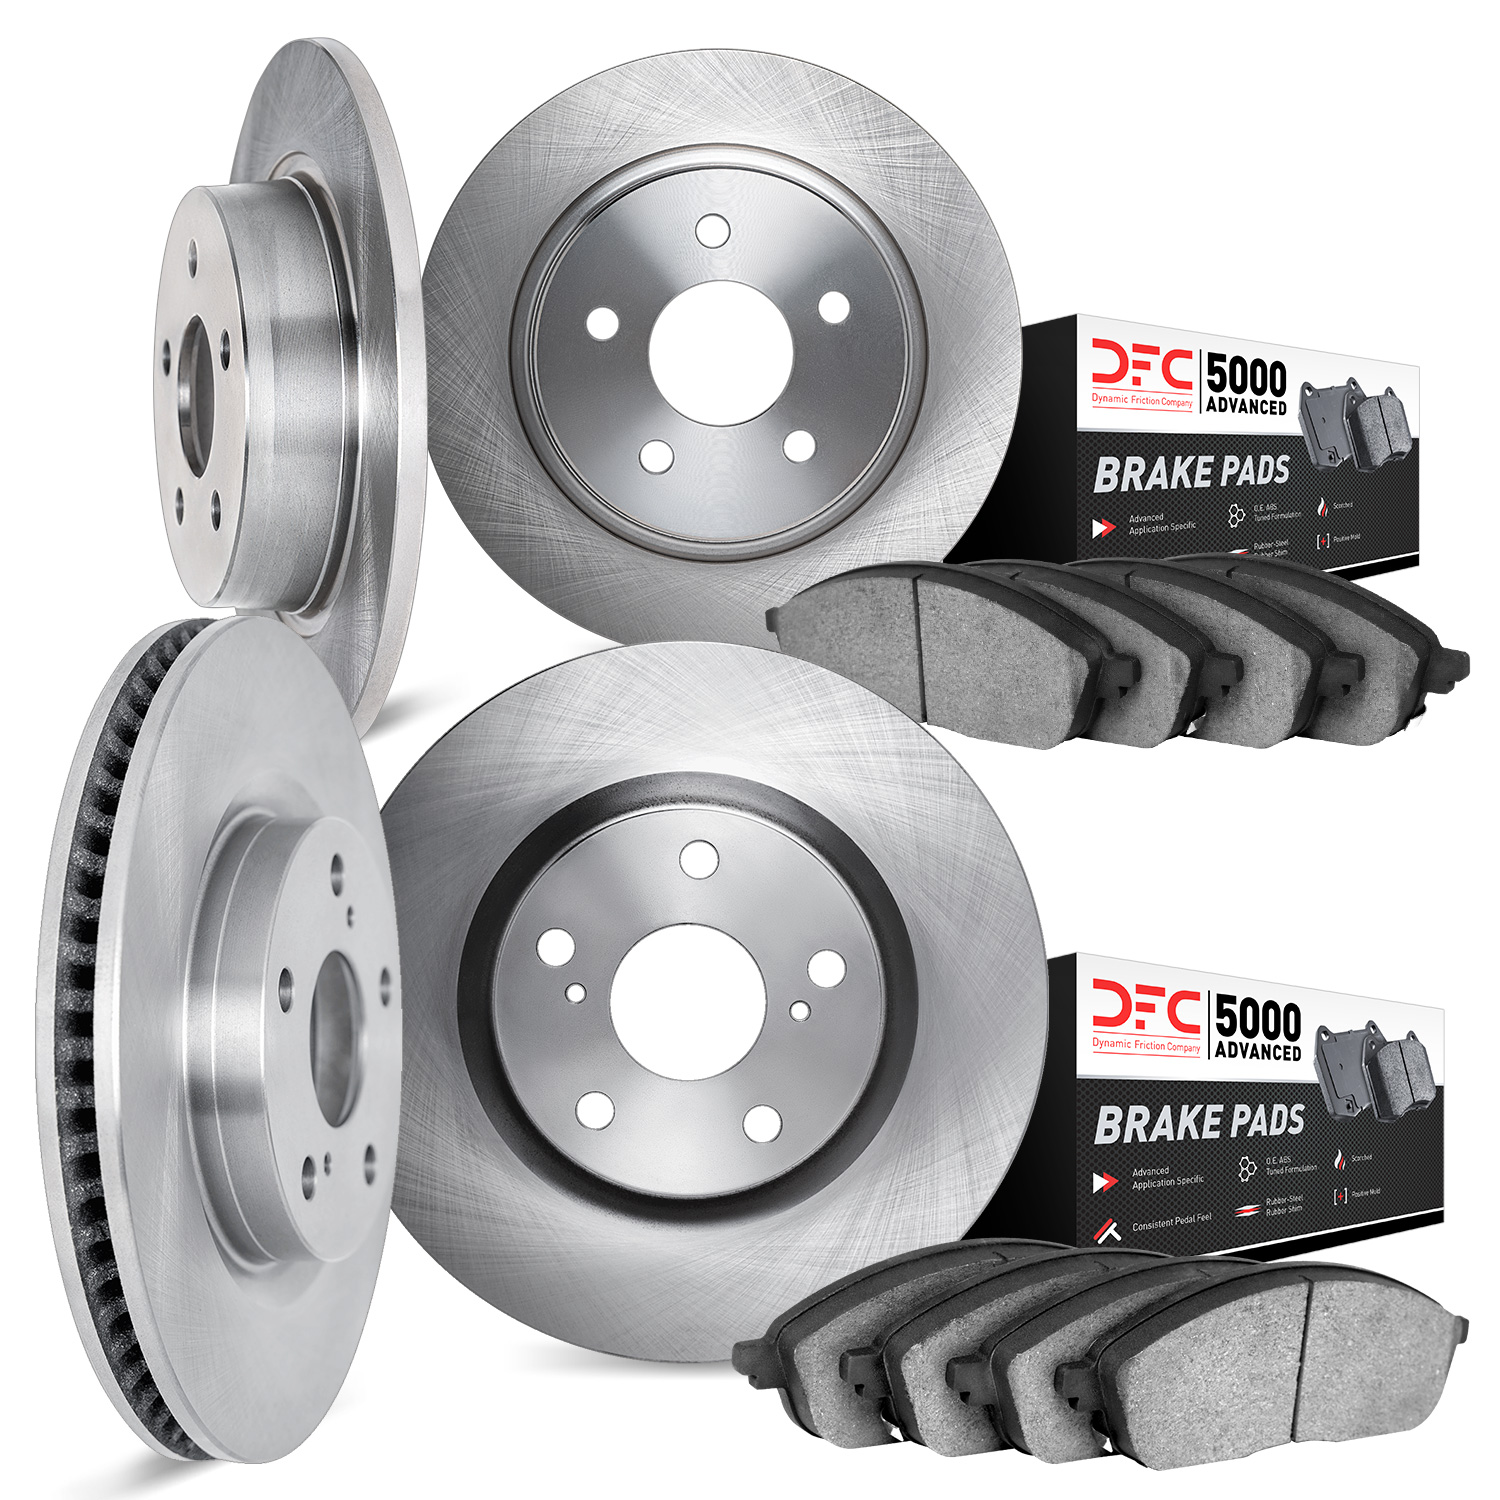 6504-53027 Brake Rotors w/5000 Advanced Brake Pads Kit, 2004-2008 GM, Position: Front and Rear